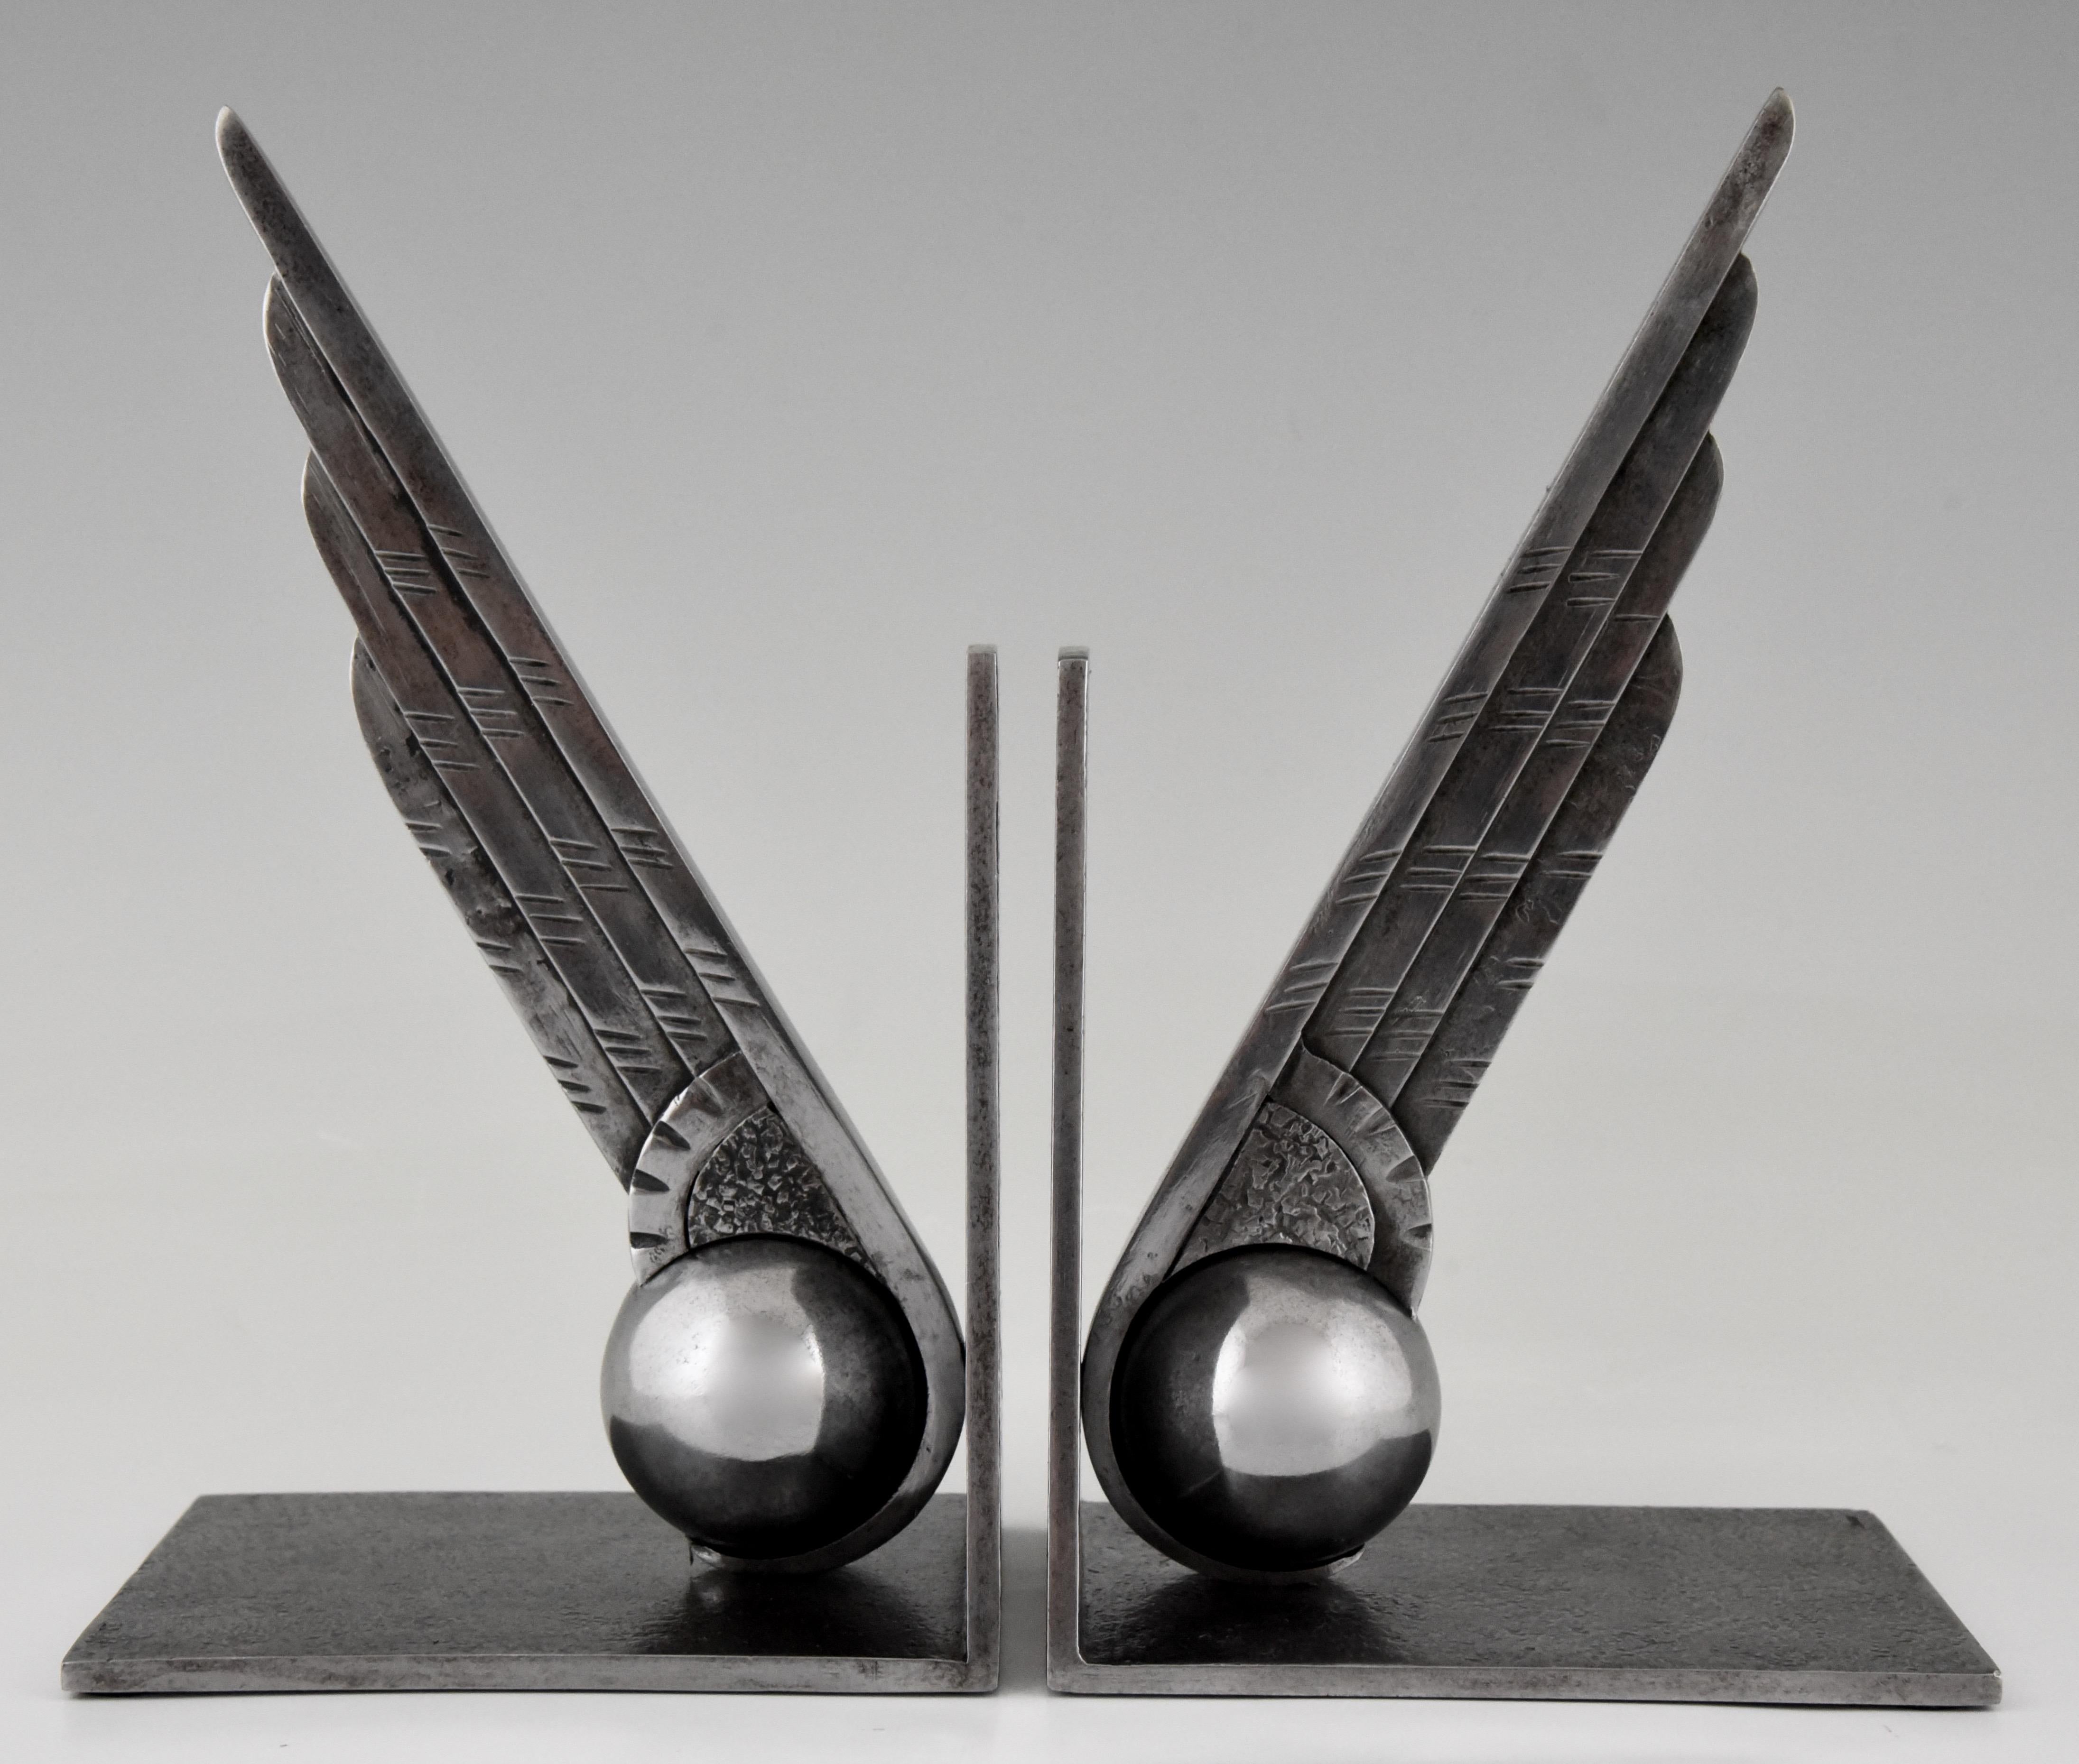 Stylish pair of wrought and cast iron ball and wing bookends on an angular support mounted on a rectangular base by Edgar Brandt, France 1930.

“Edgar Brandt master of Art Deco ironwork” by Joan Kahr. These bookends were designed to commemorate